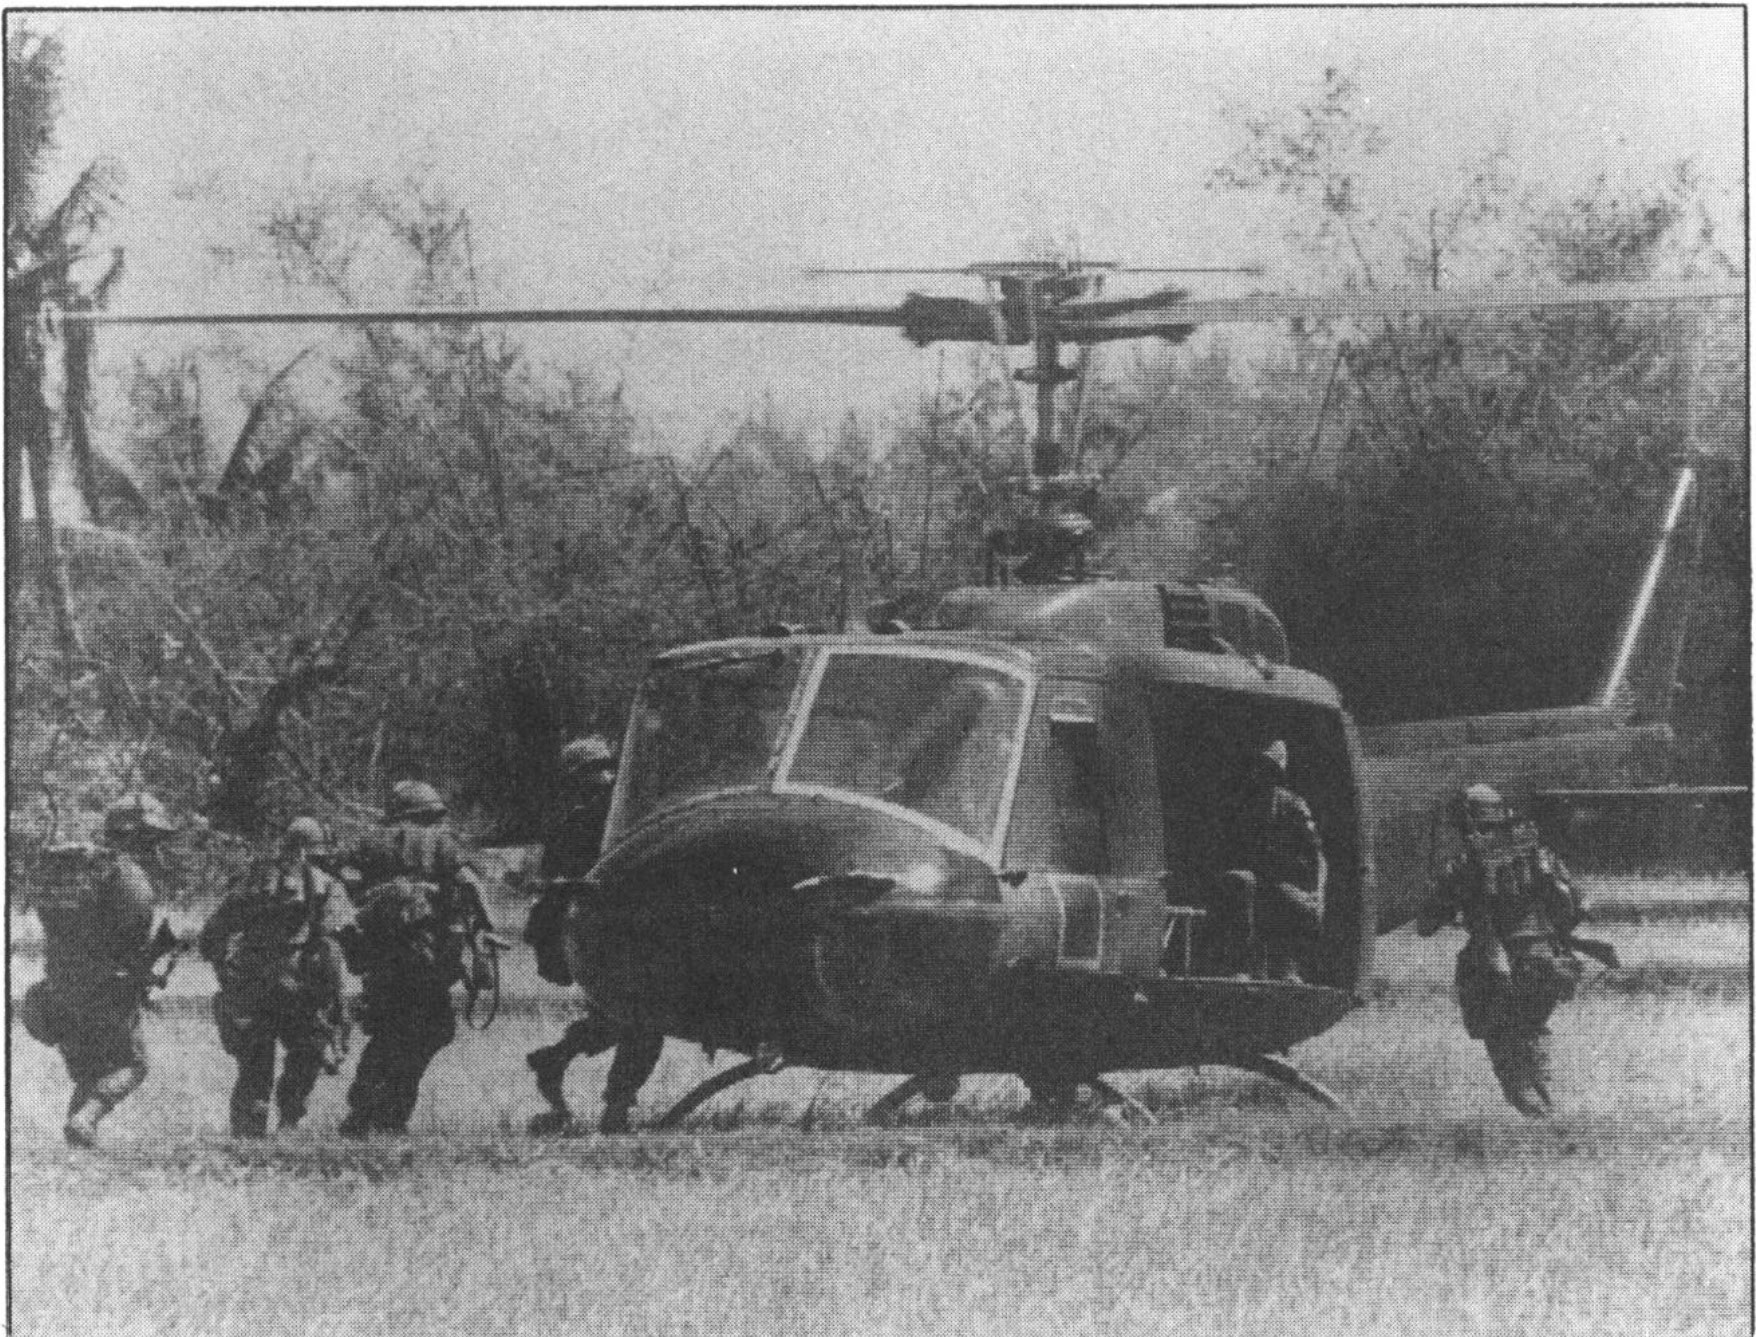 UH-1B Bell (Huey) picking up 1st Air Cavalry reconnaissance troops north of Bong Son Plains, South Vietnam, June 1967.